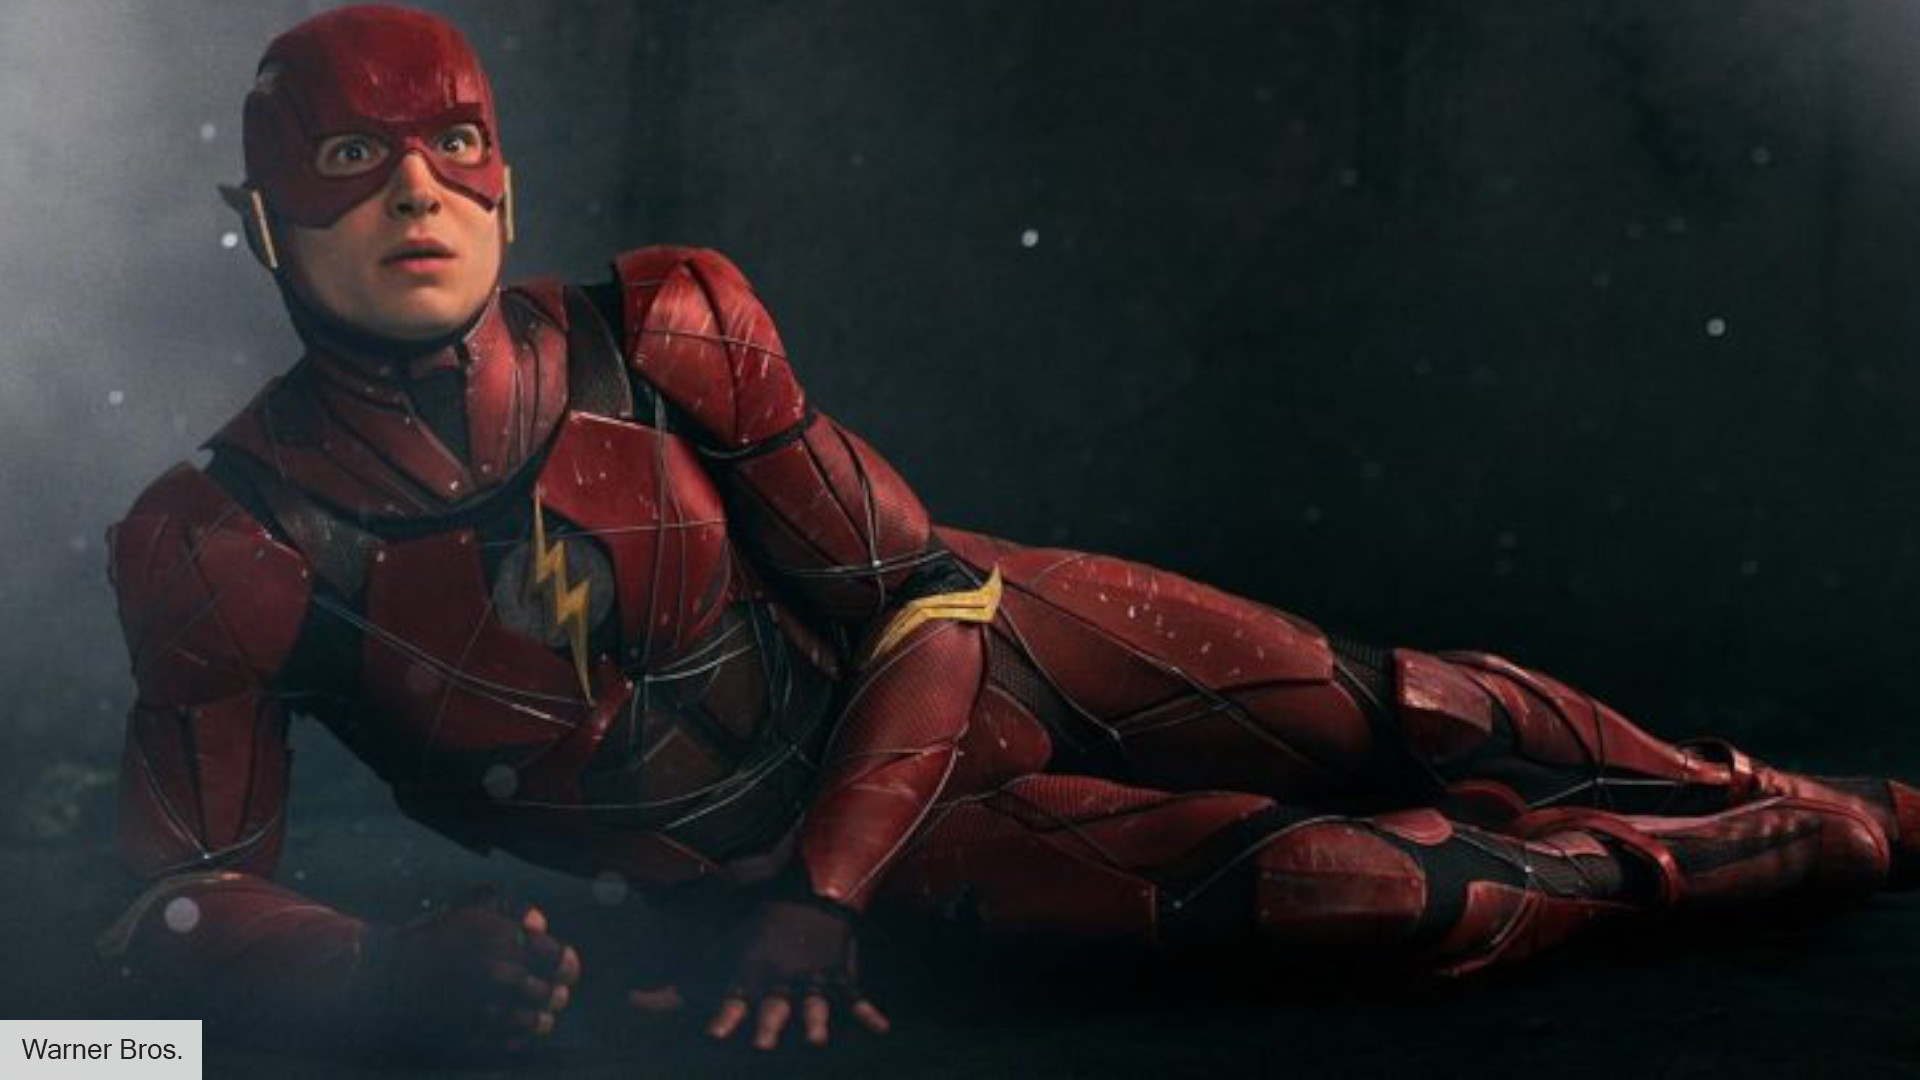 New The Flash trailer coming “soon” - The Digital Fix